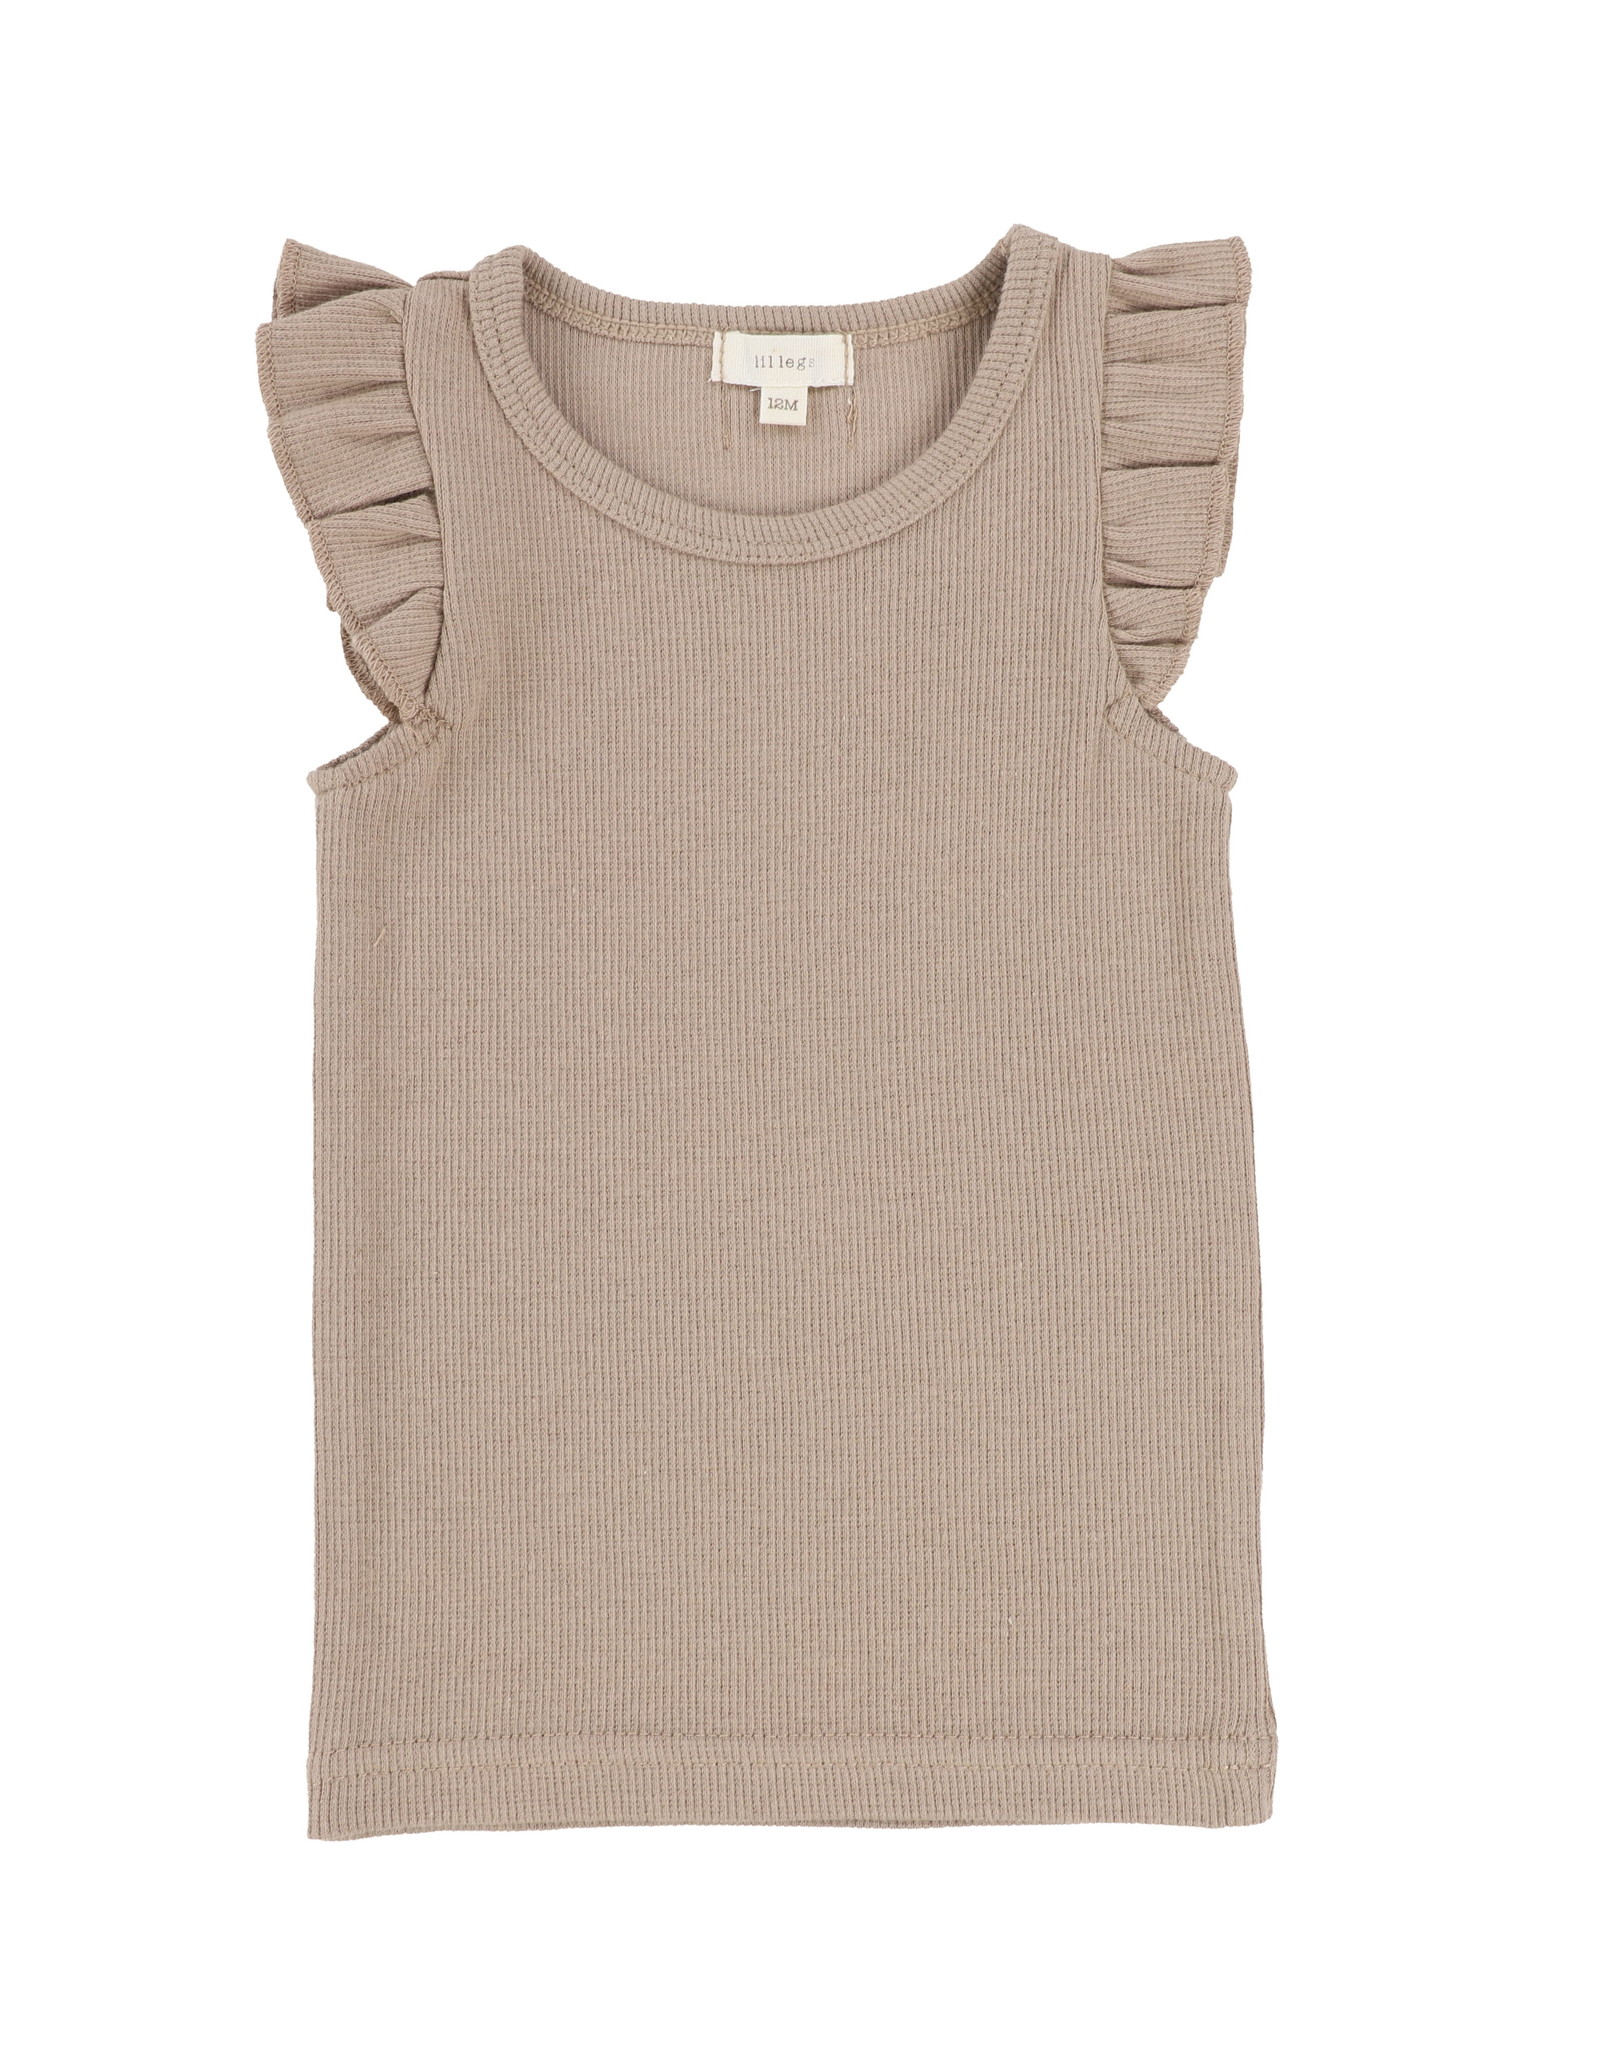 Lil Legs Ribbed Flutter Tank - Toetally You